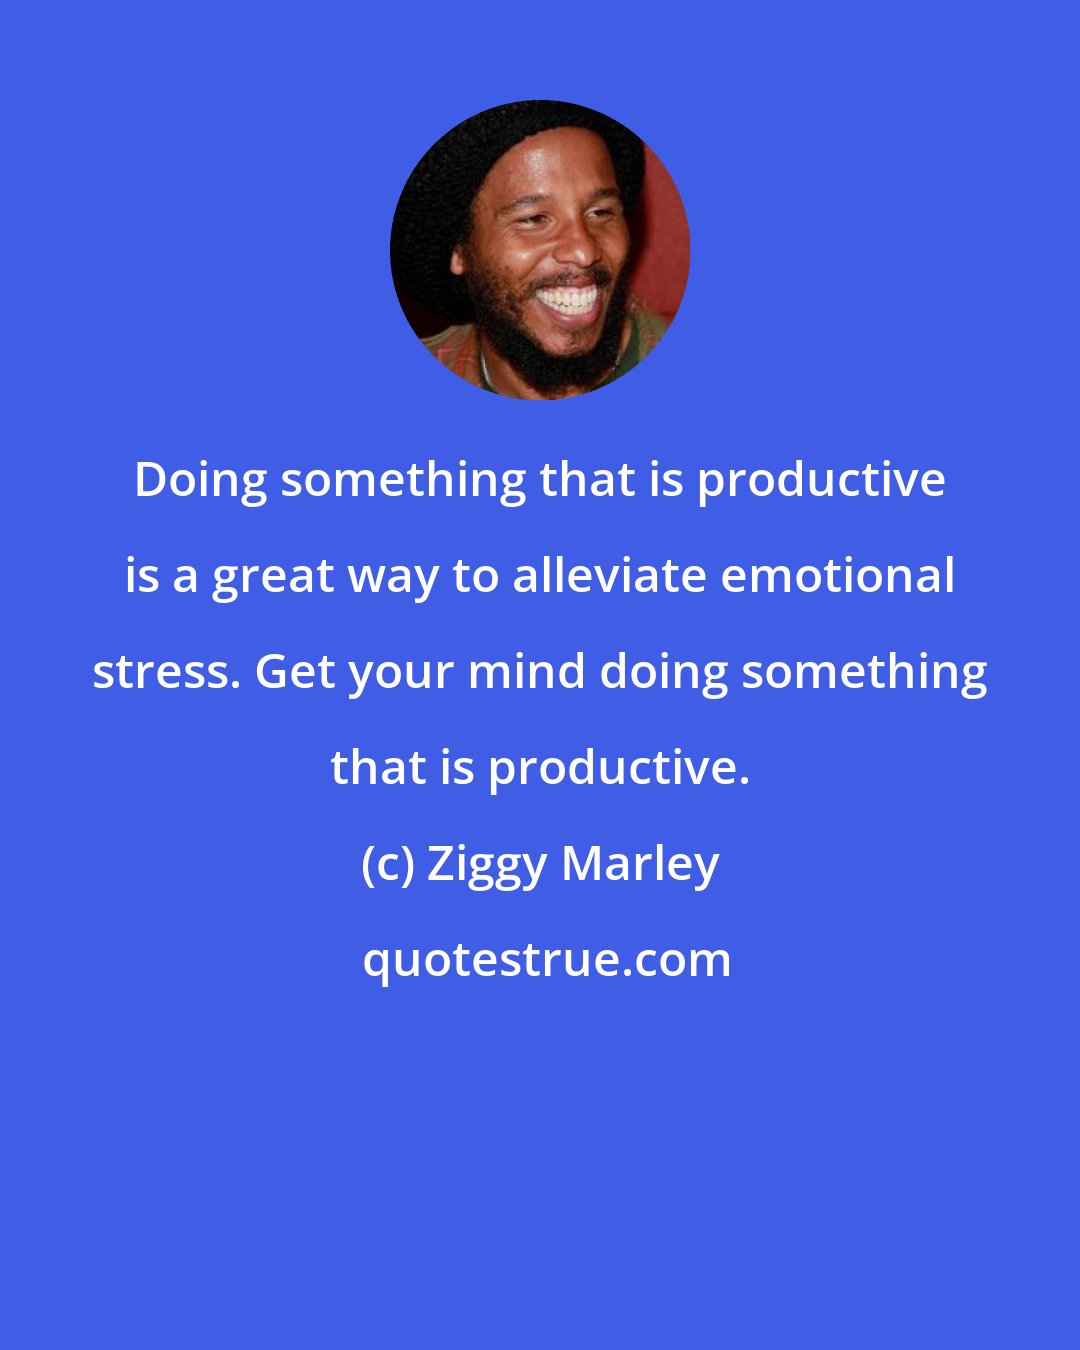 Ziggy Marley: Doing something that is productive is a great way to alleviate emotional stress. Get your mind doing something that is productive.